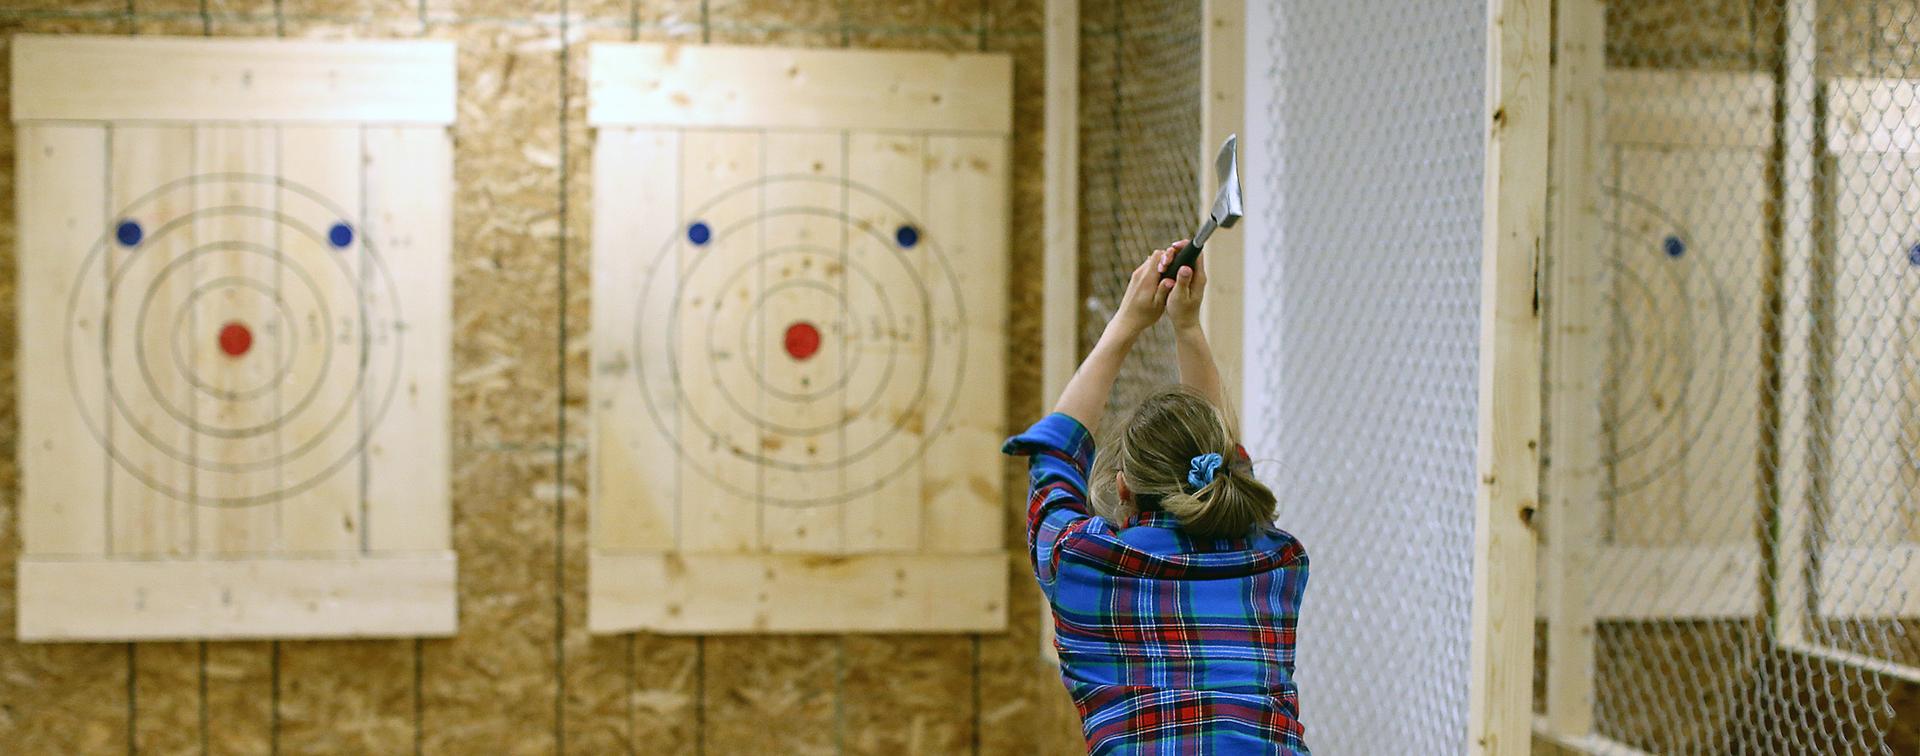 A woman throws an axe at a target at Axe and Grind